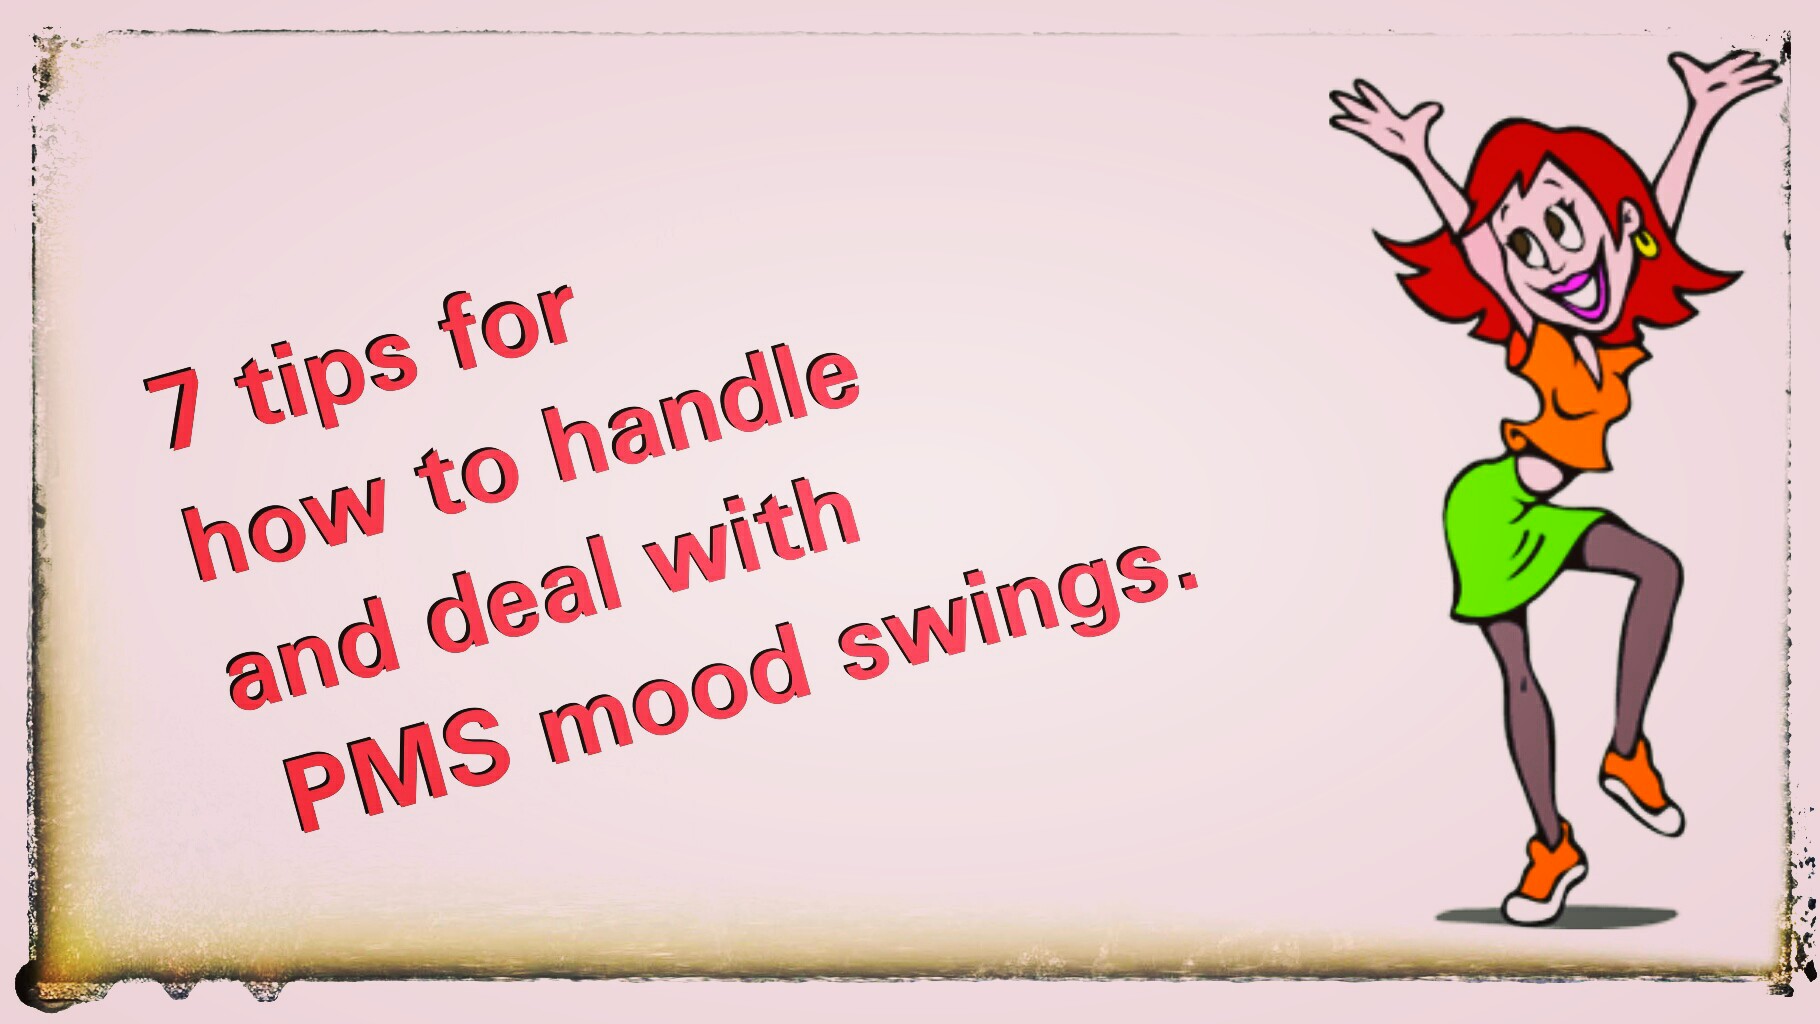 How to deal with PMS